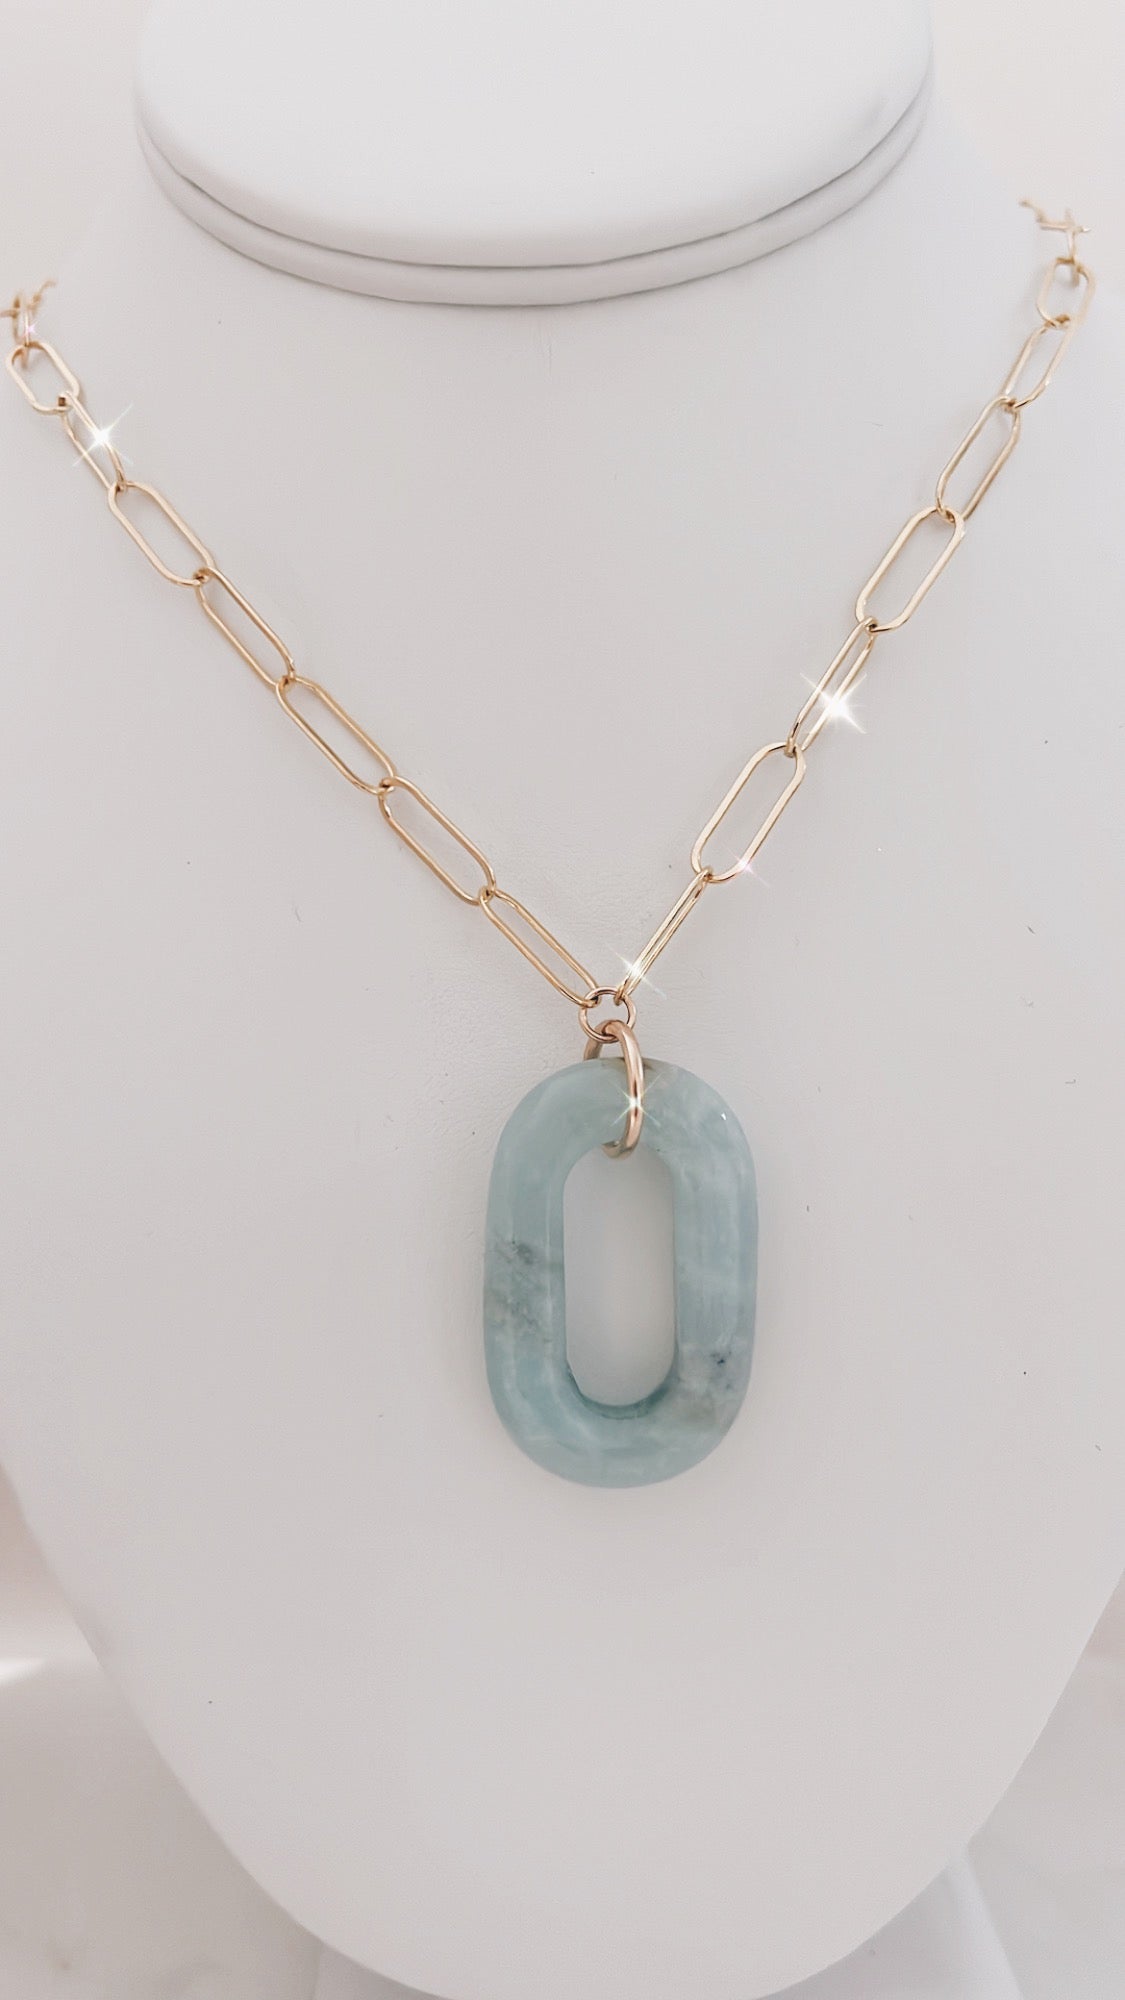 Oval Gemstone Pendant Necklace + More Options